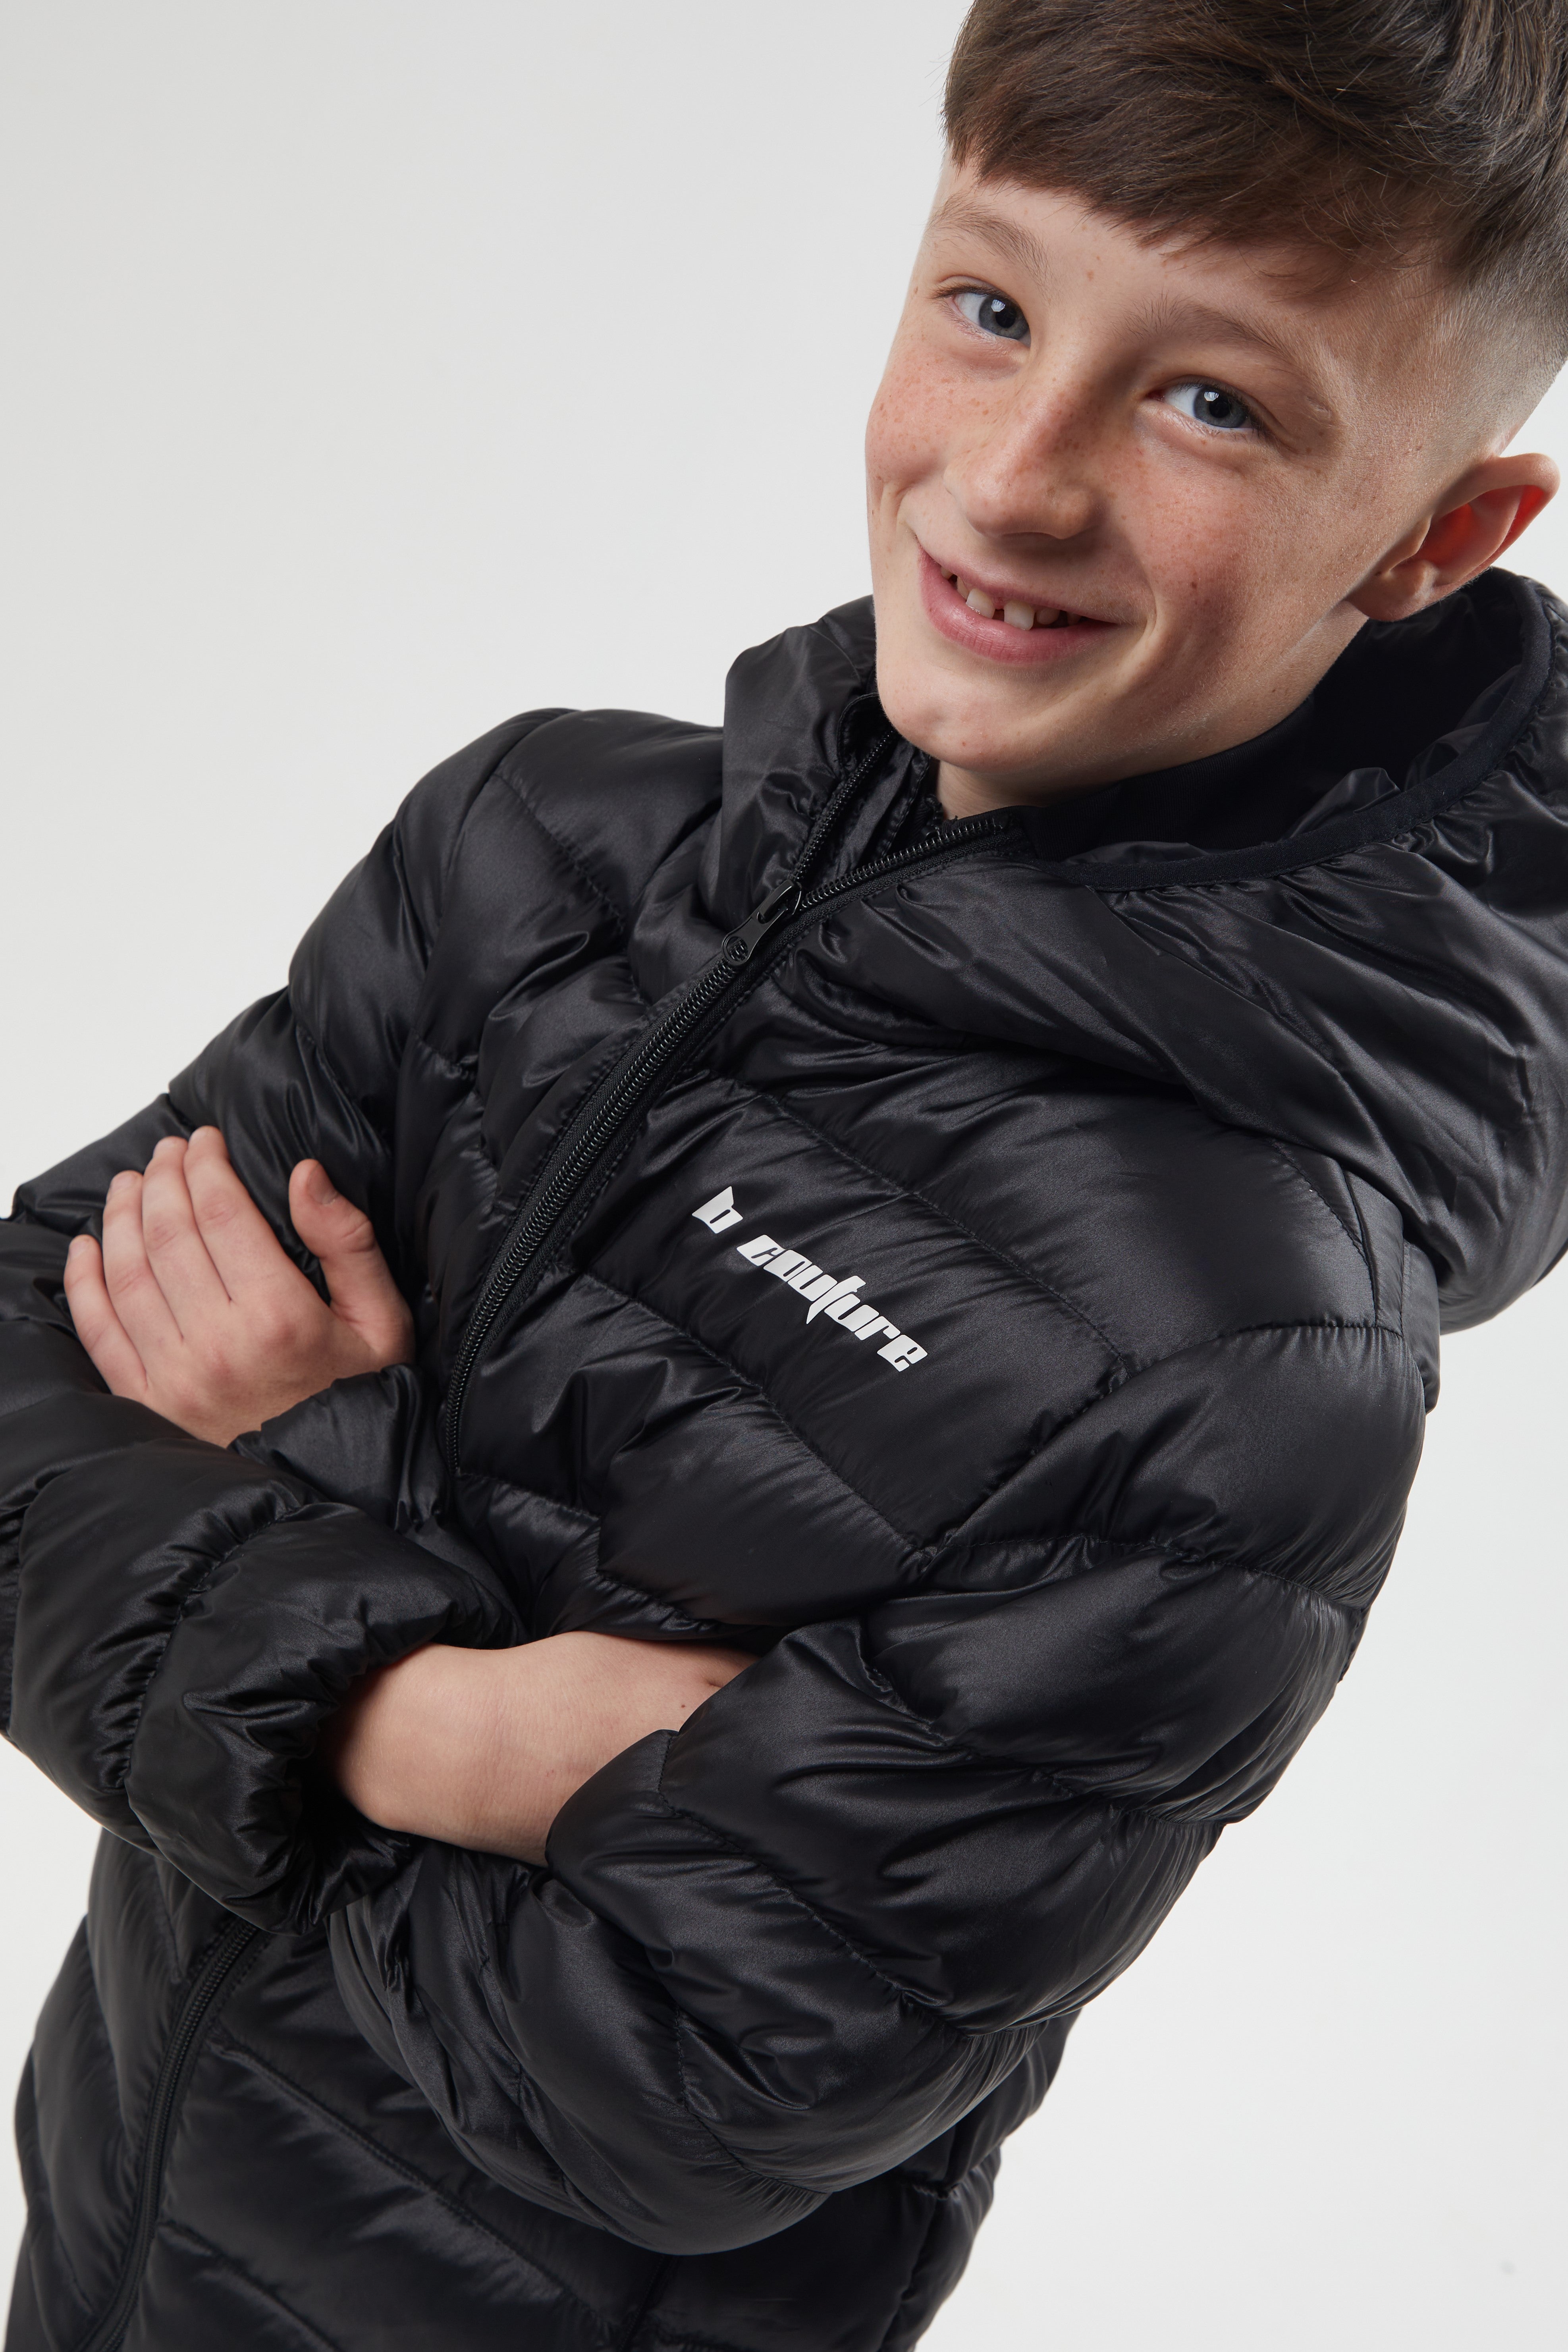 Buy Boy's Jacket (Black, 15-16 Years) at Amazon.in